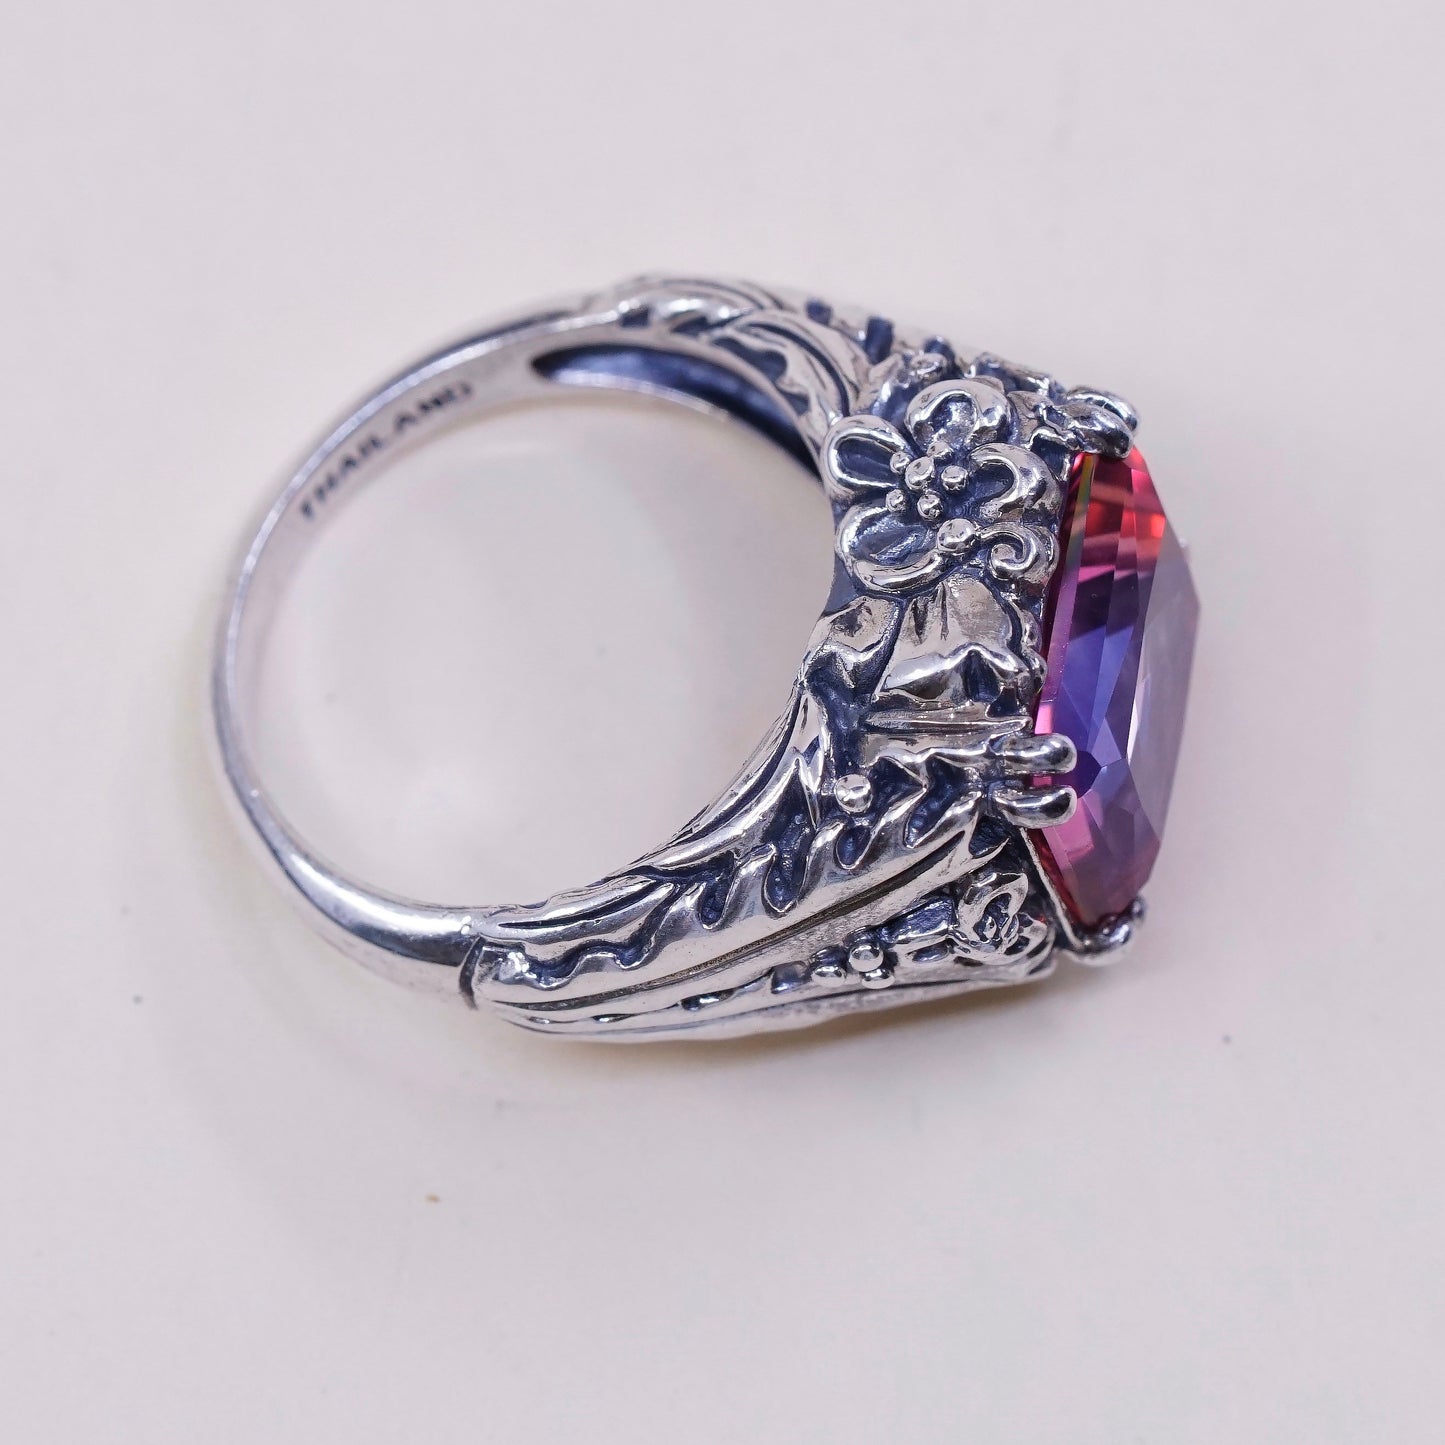 sz 7.25, VTG cocktail Sterling silver handmade ring, 925 crown w/ pink crystal